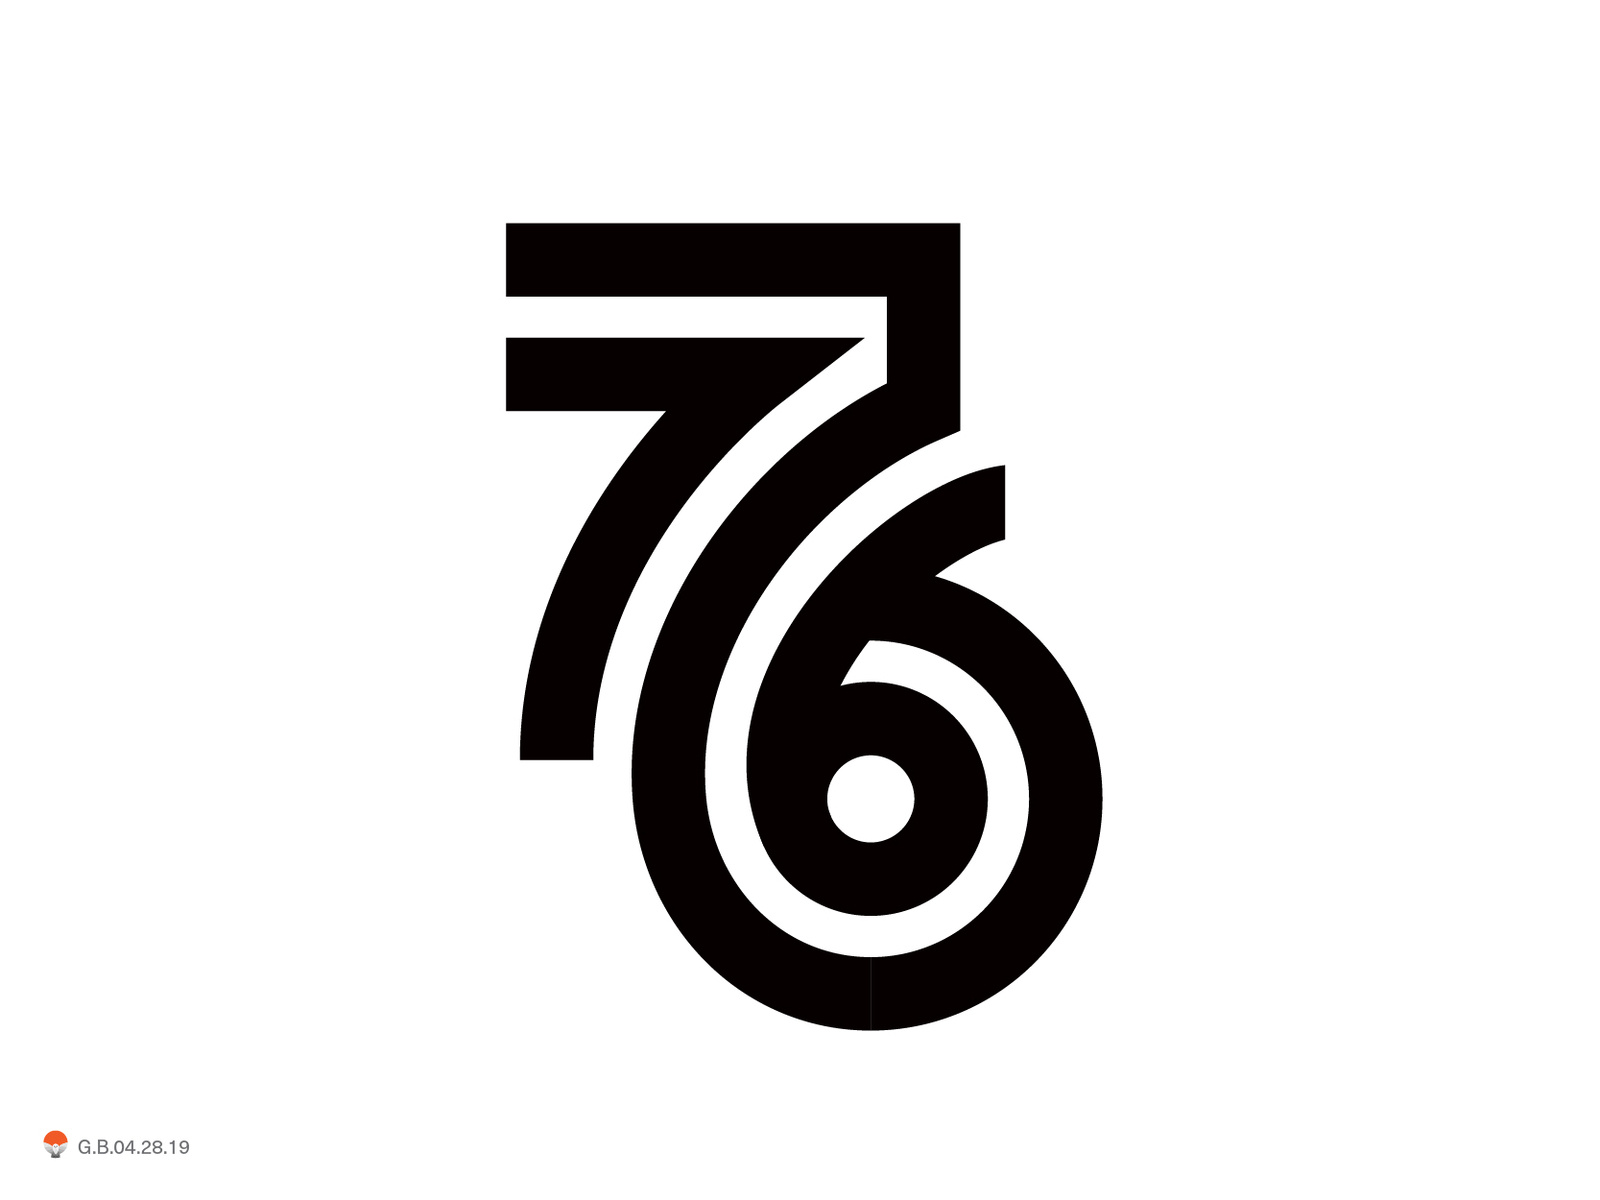  76 By George Bokhua On Dribbble